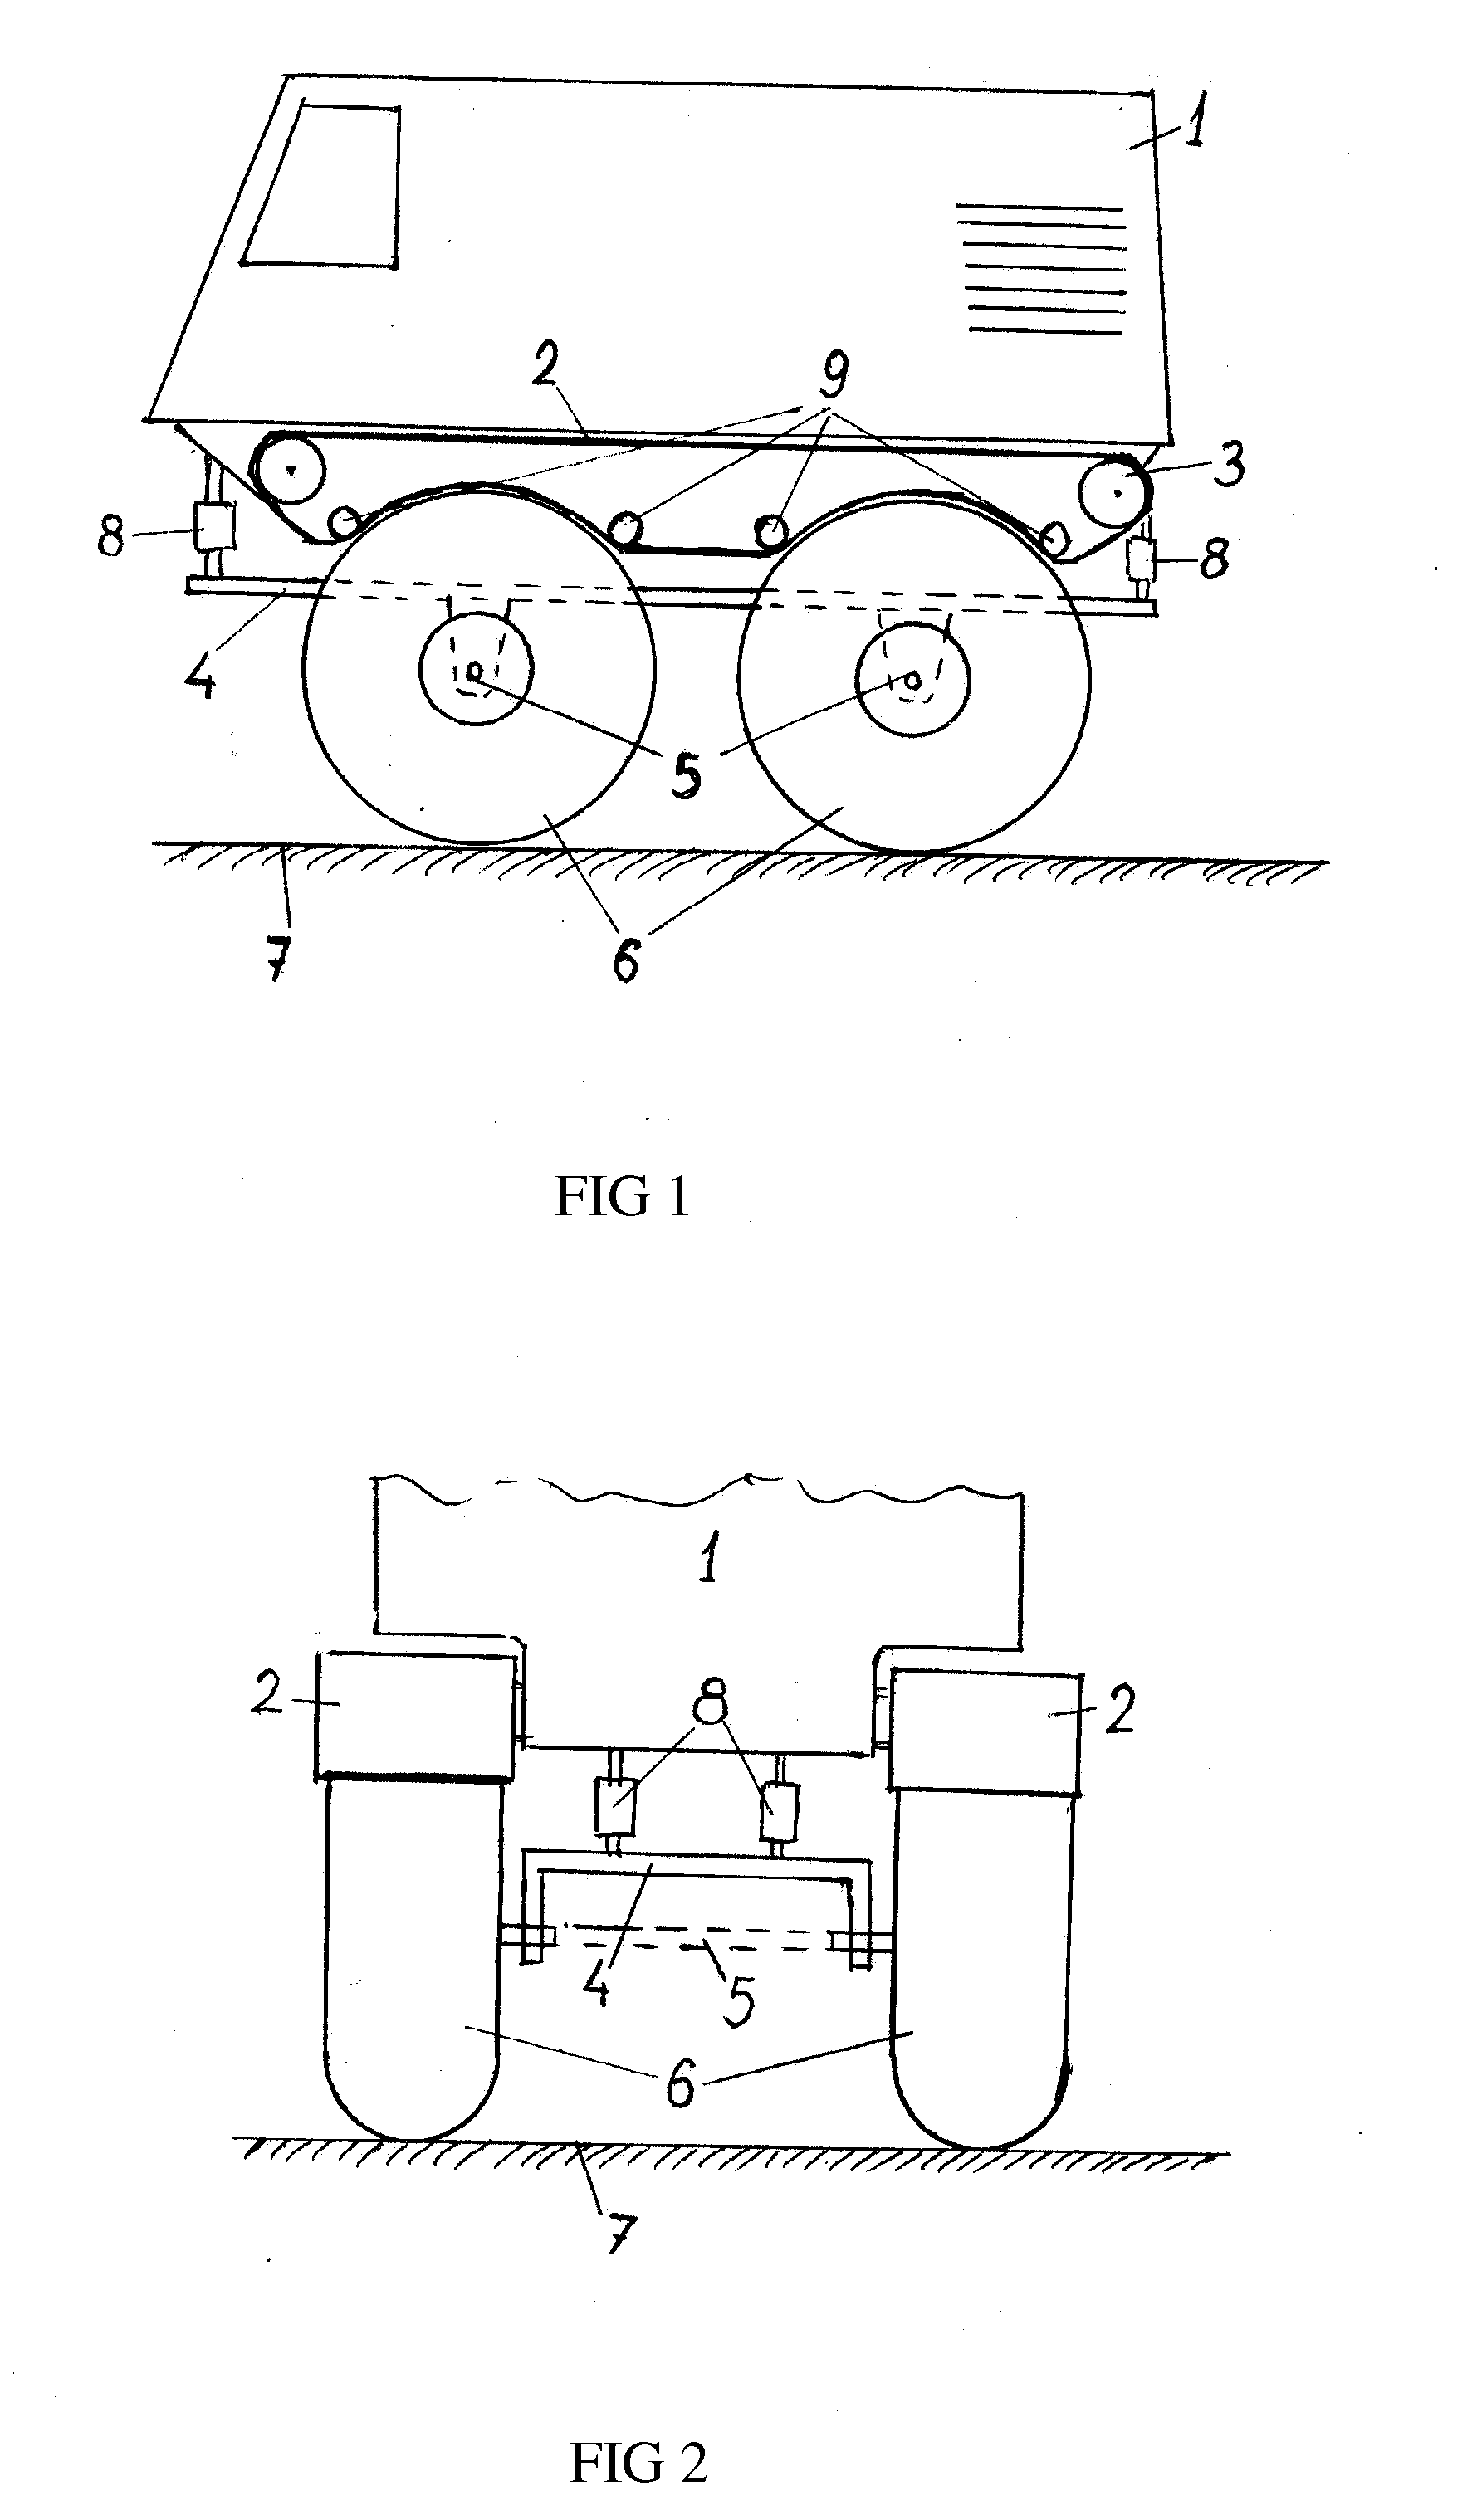 All-Terrain Vehicle and Method of Increasing Passability Thereof